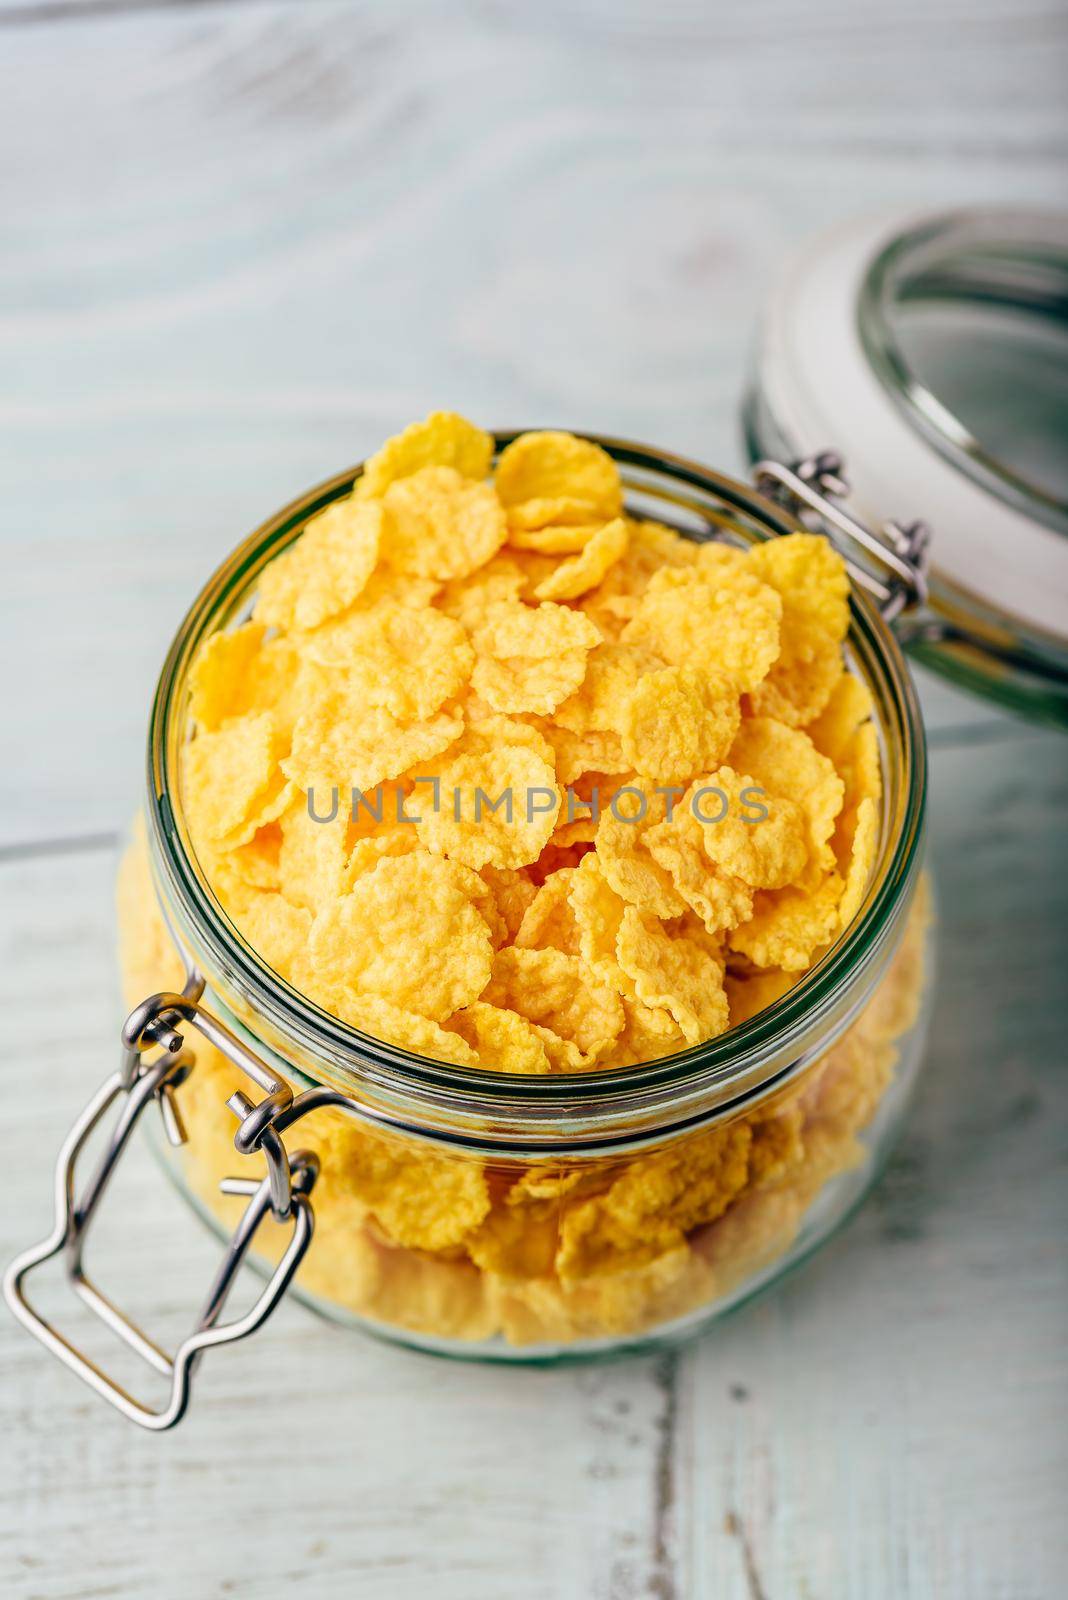 Corn flakes in a glass jar on wooden surface